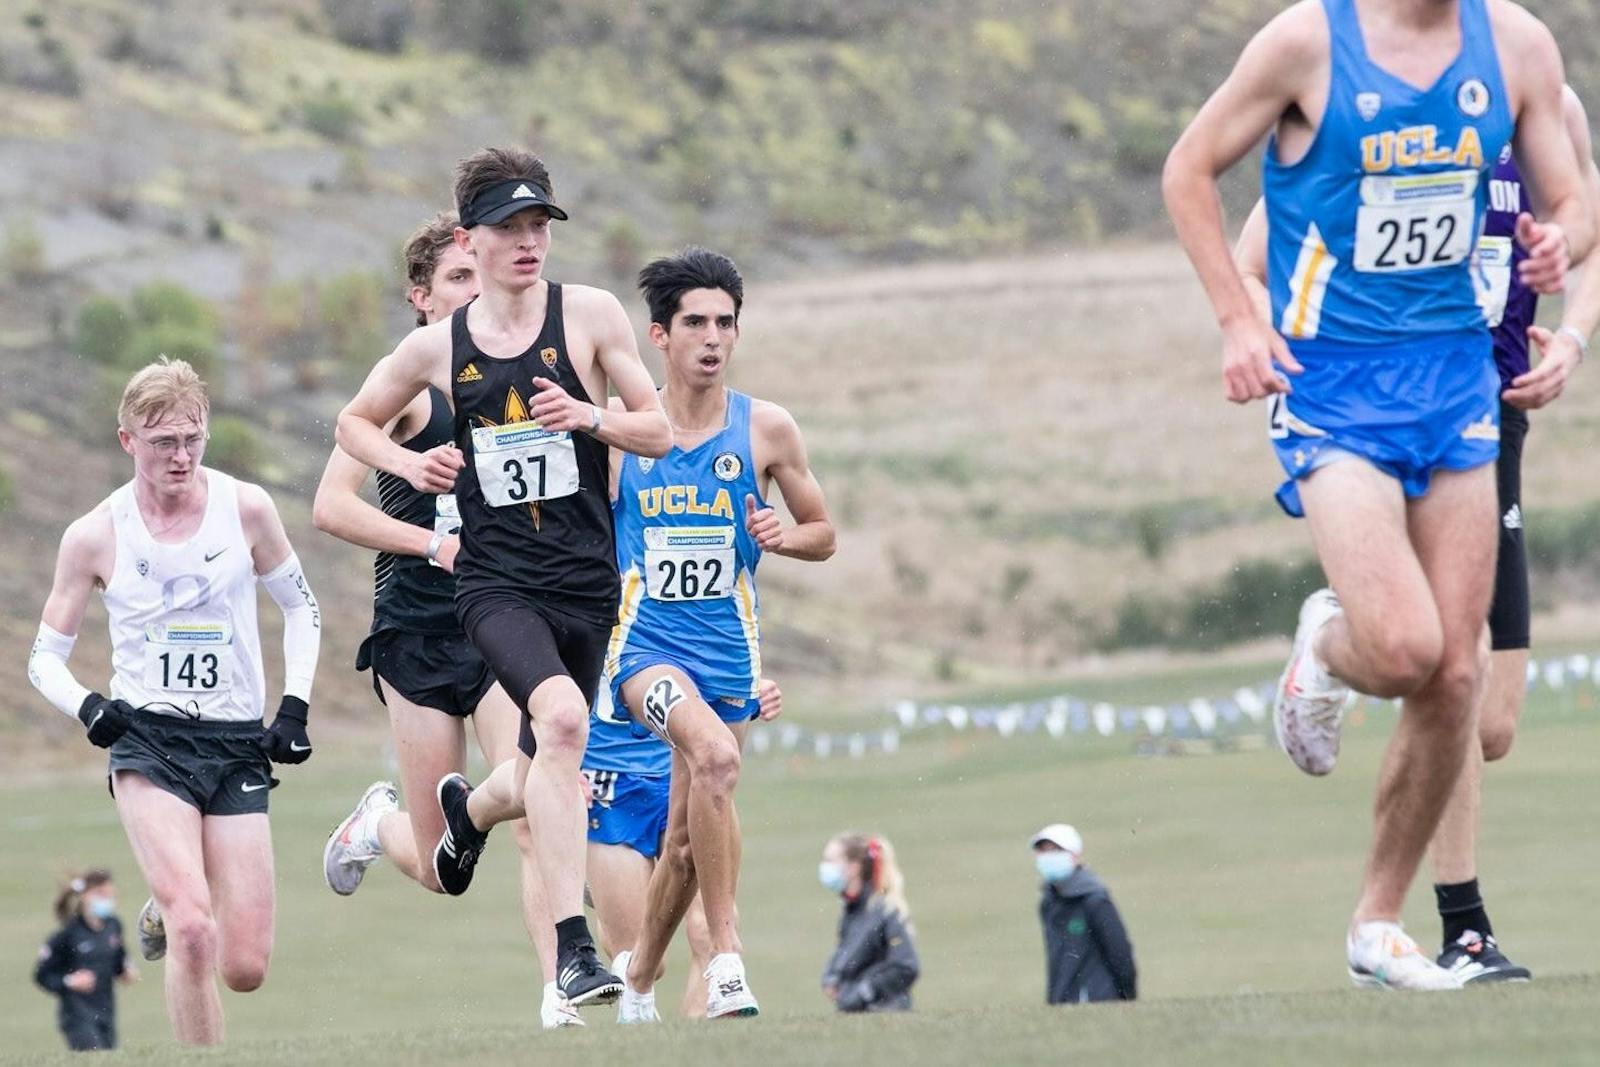 ASU cross country has strong team showing at Pac12 Championships The